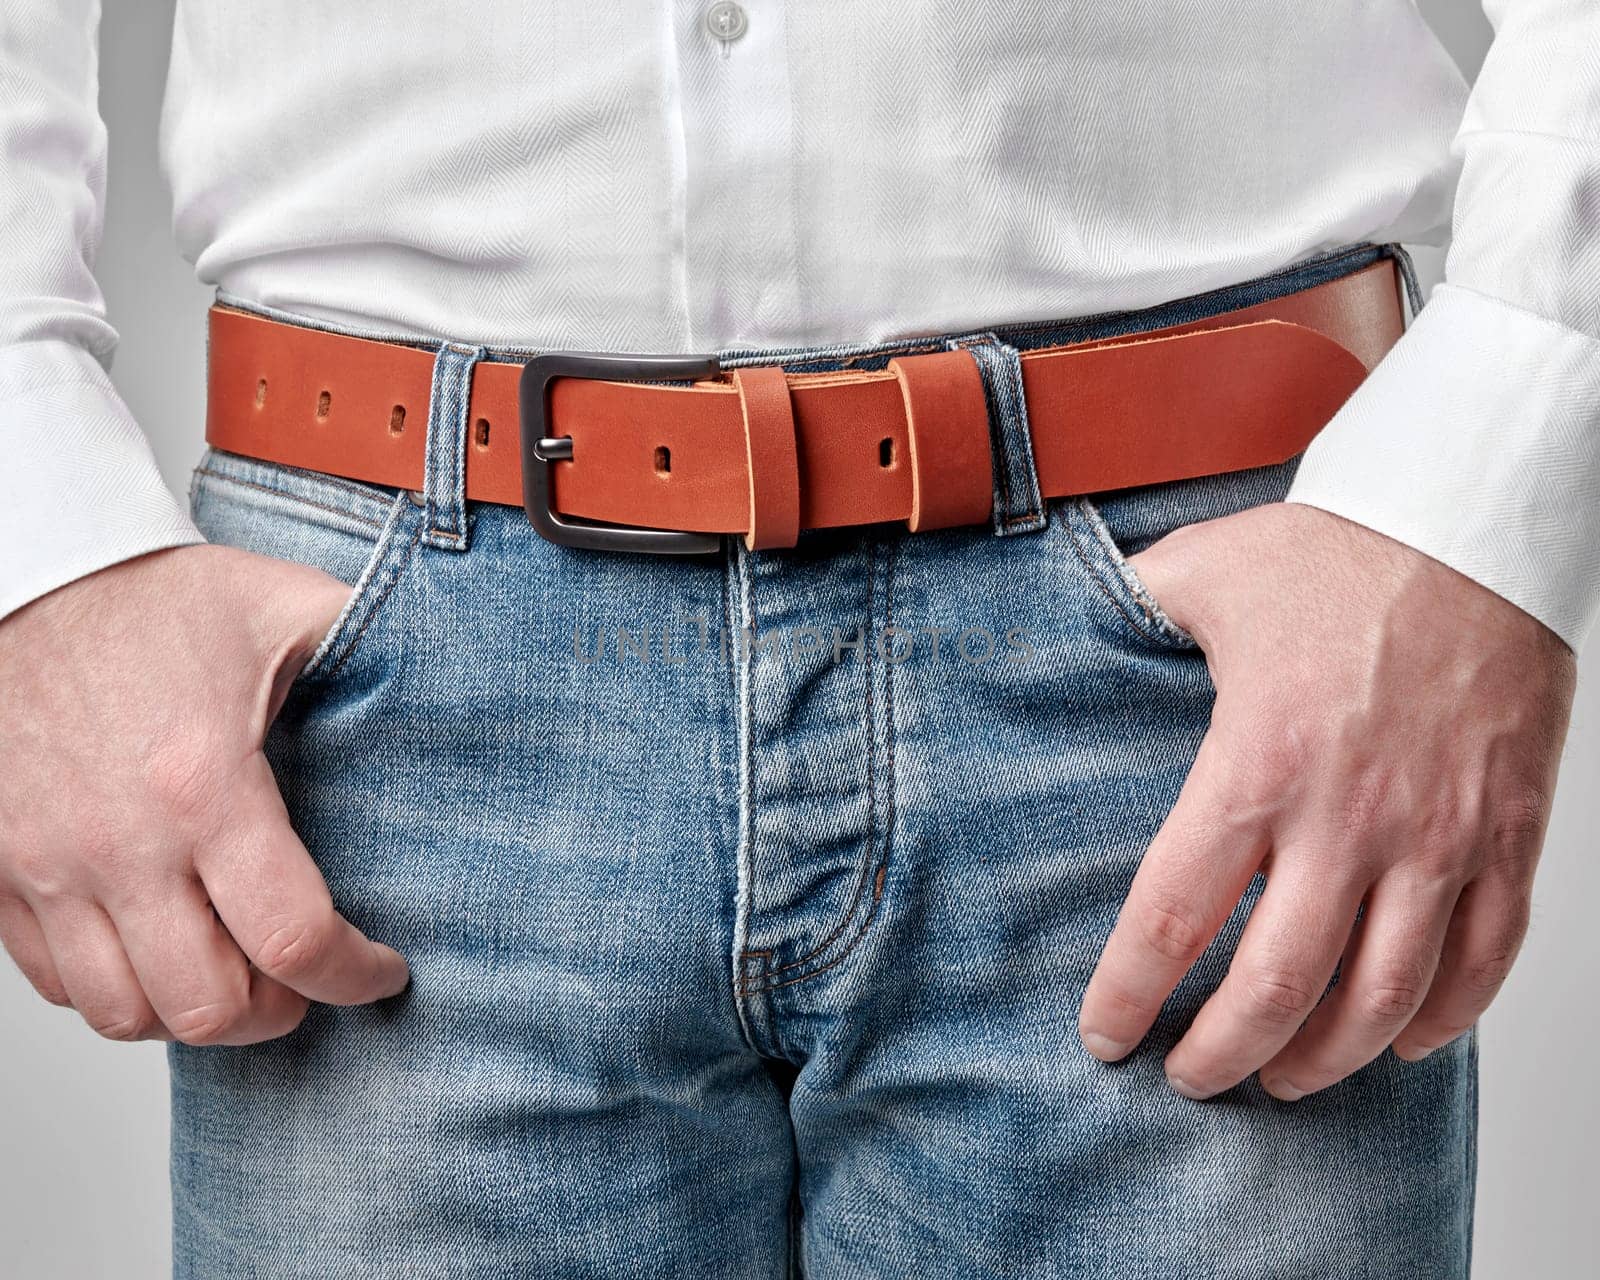 Casual male look completed with handmade brown genuine leather belt featuring embossed DAD customization, merging personal style with artisan quality